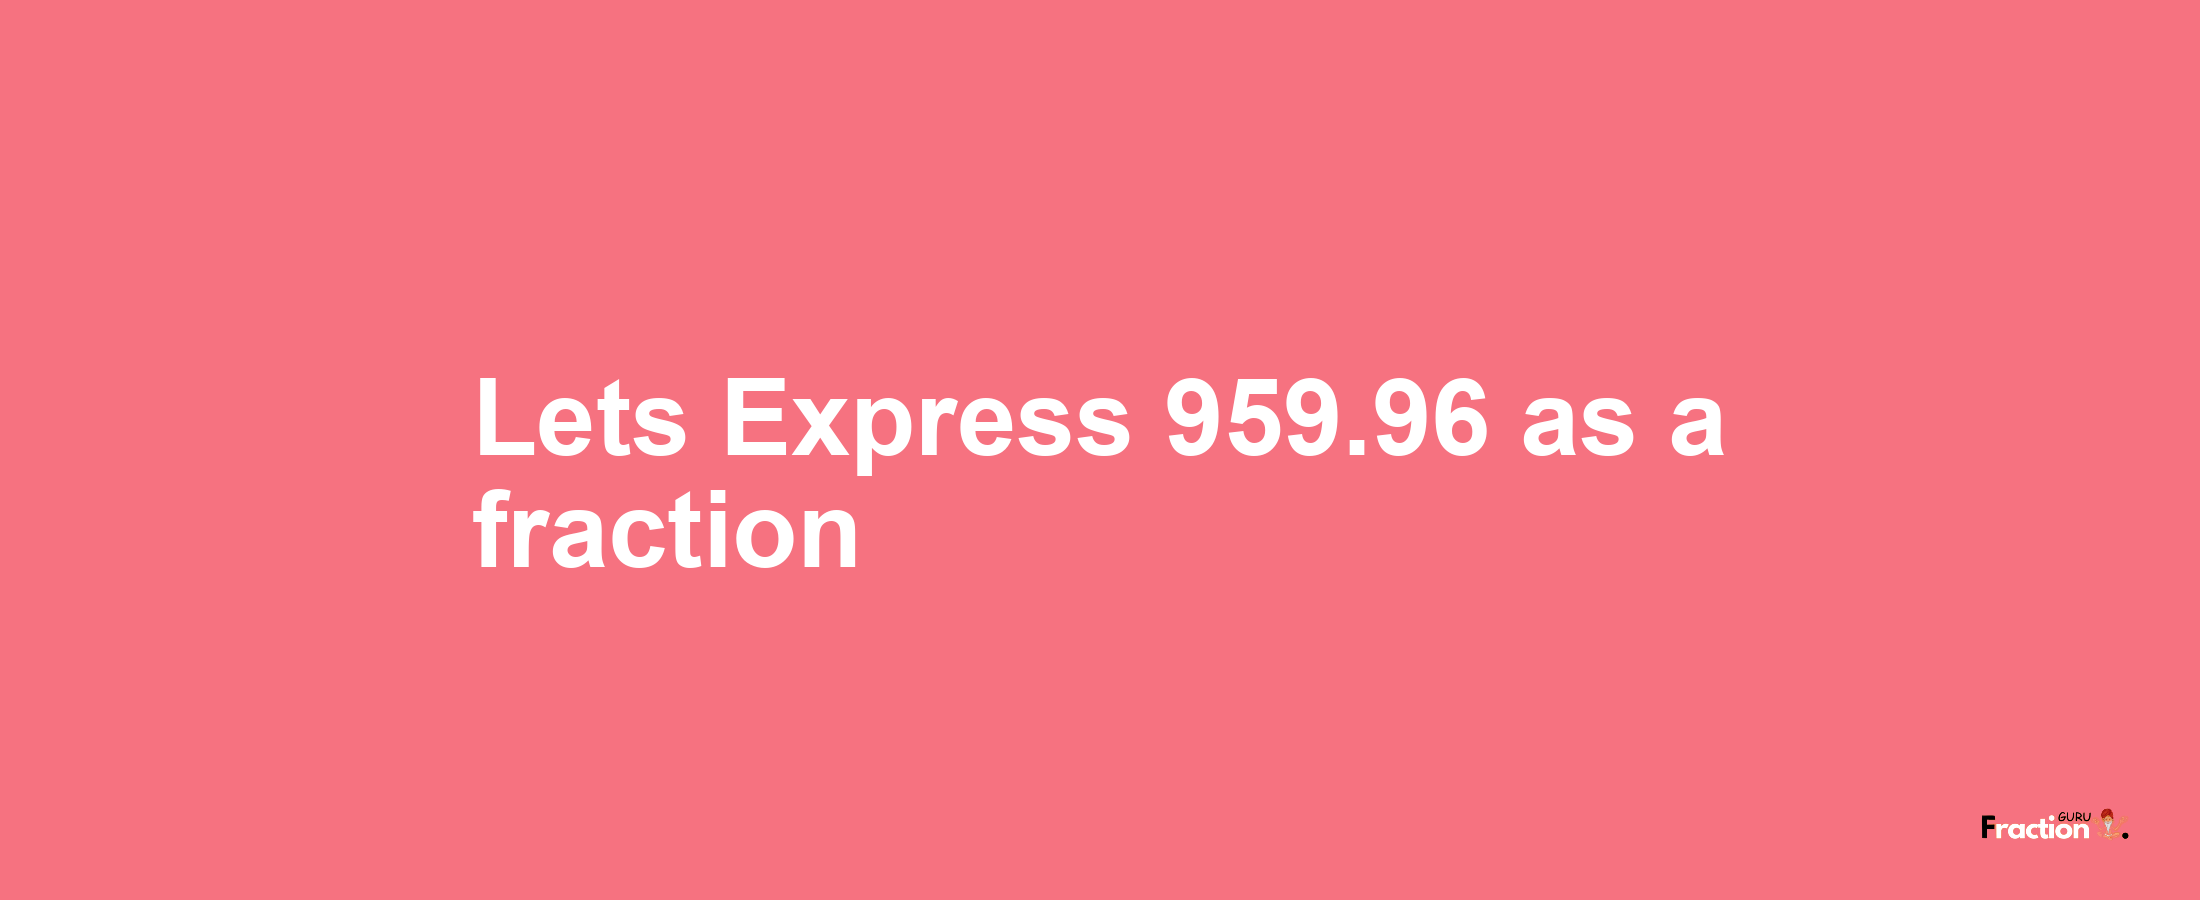 Lets Express 959.96 as afraction